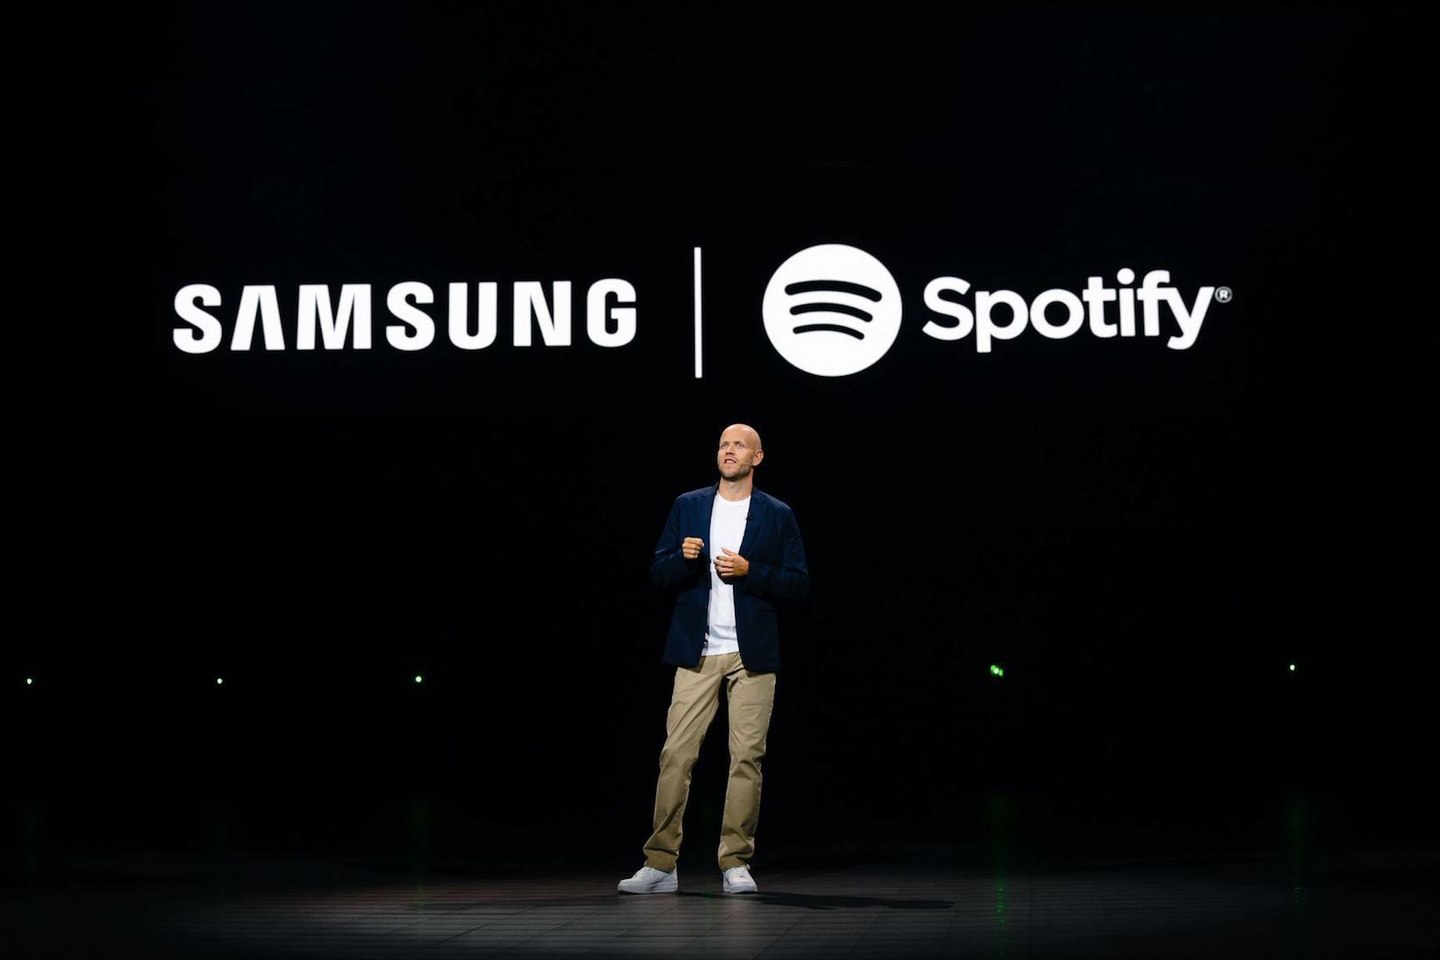 Spotify choose Samsung for seamless music listening experiences